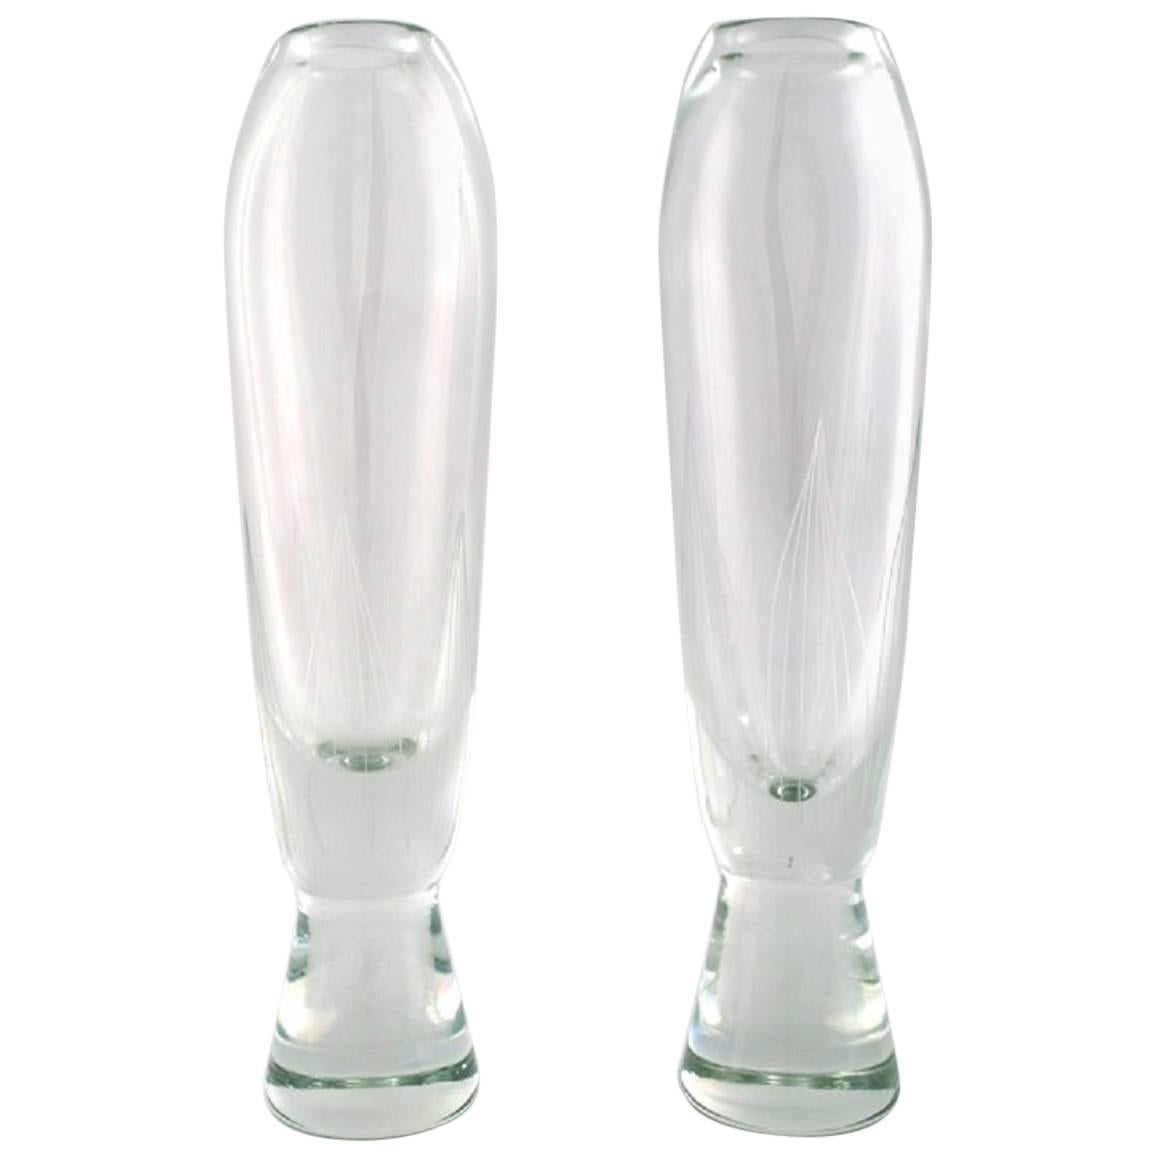 Pair of Large Orrefors Glass Vases, Stylish Swedish Design, 1950s-1960s For Sale